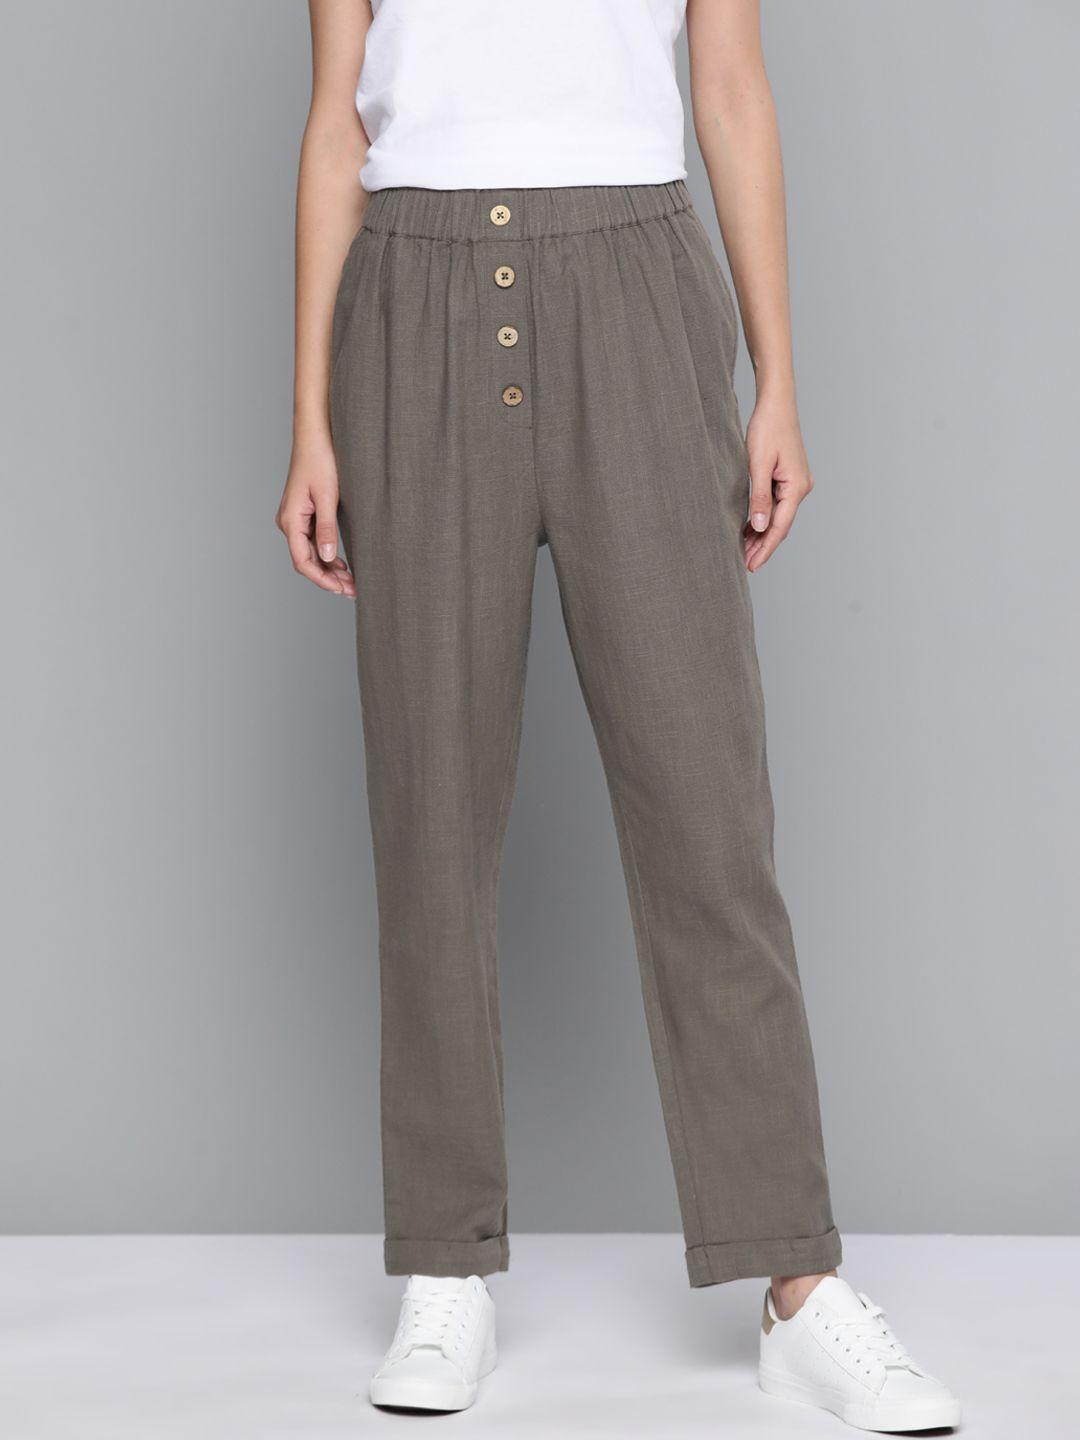 mast-&-harbour-women-taupe-solid-pure-cotton-trousers